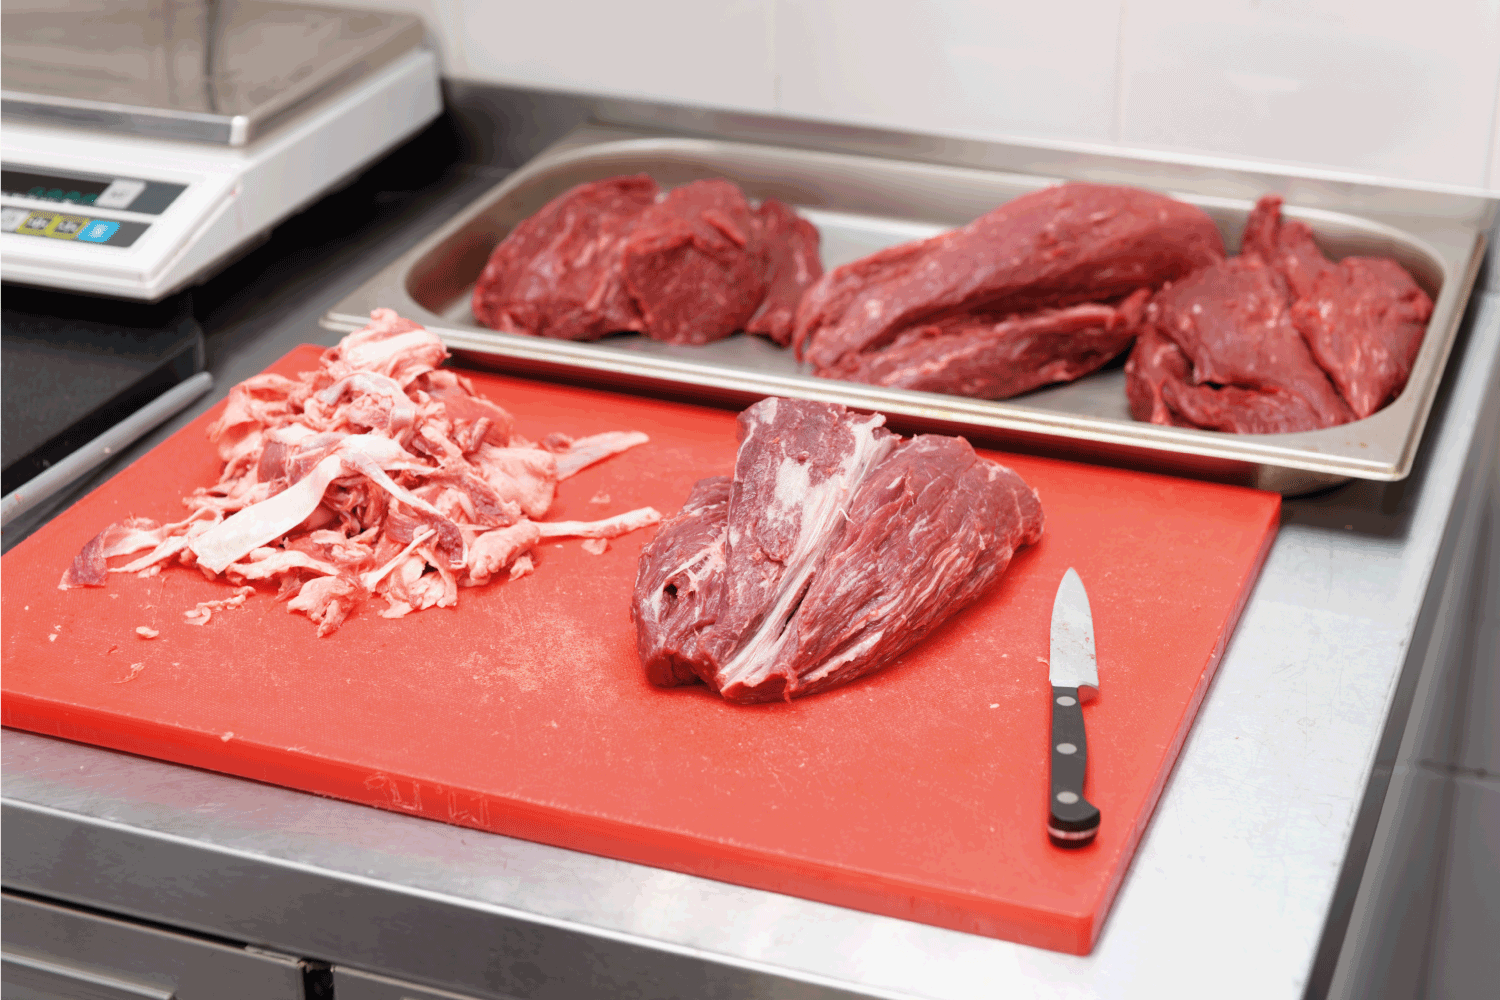 trimming meat fat in a restaurant kitchen with a paring knife